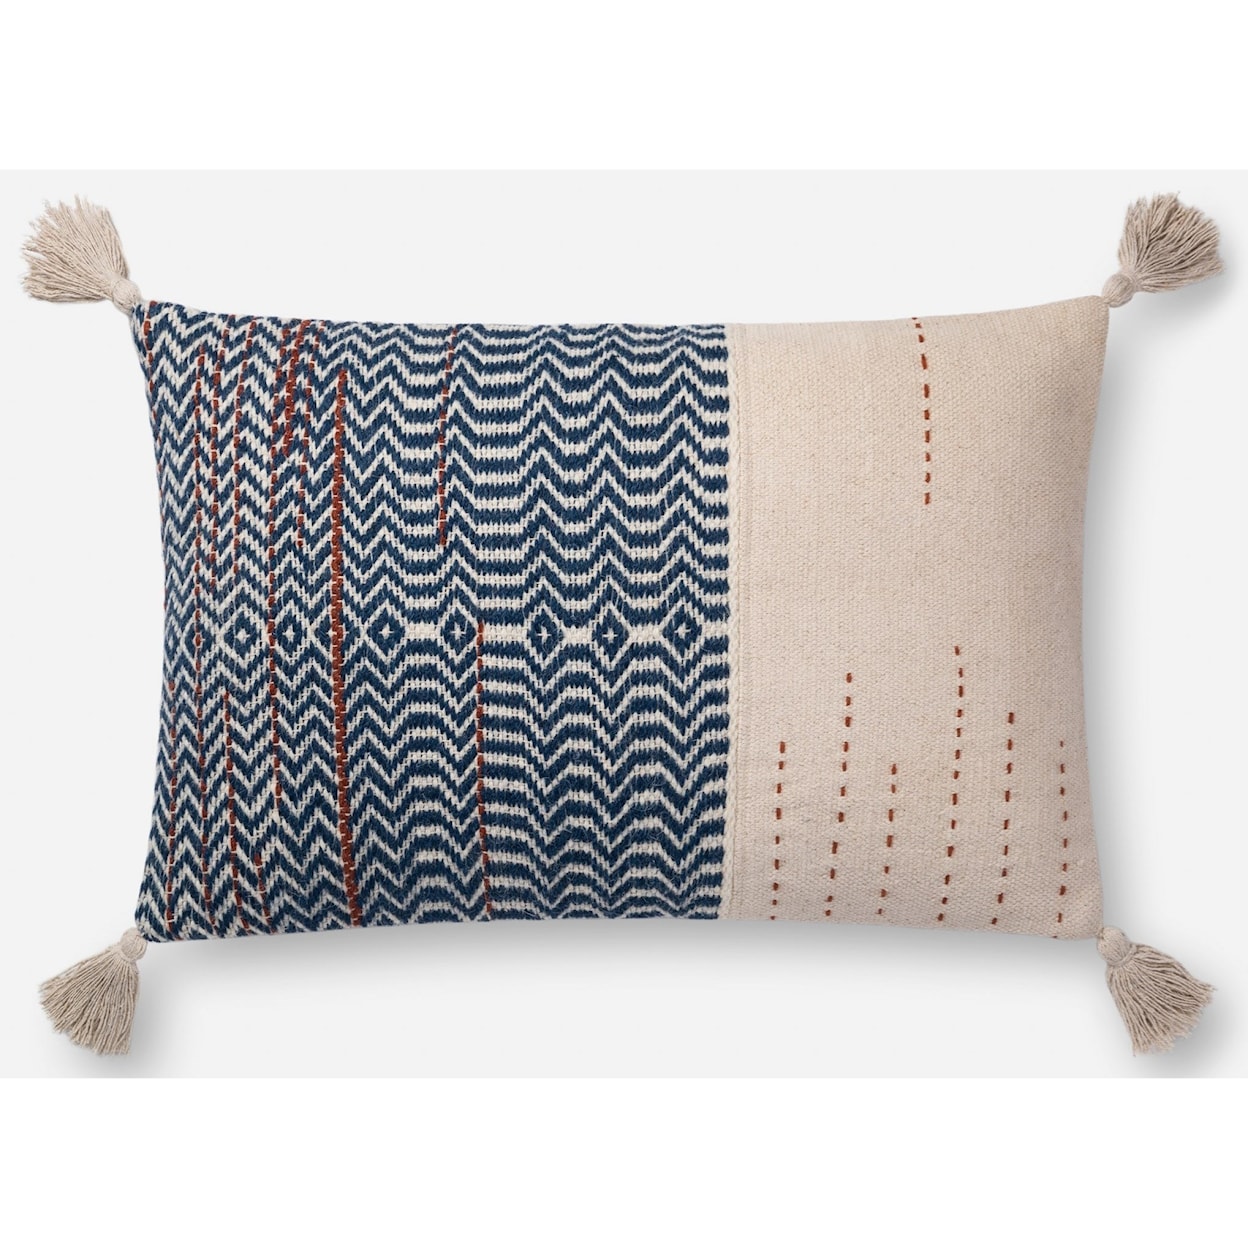 Magnolia Home by Joanna Gaines for Loloi Accent Pillows 16" x 26" Polyester Pillow